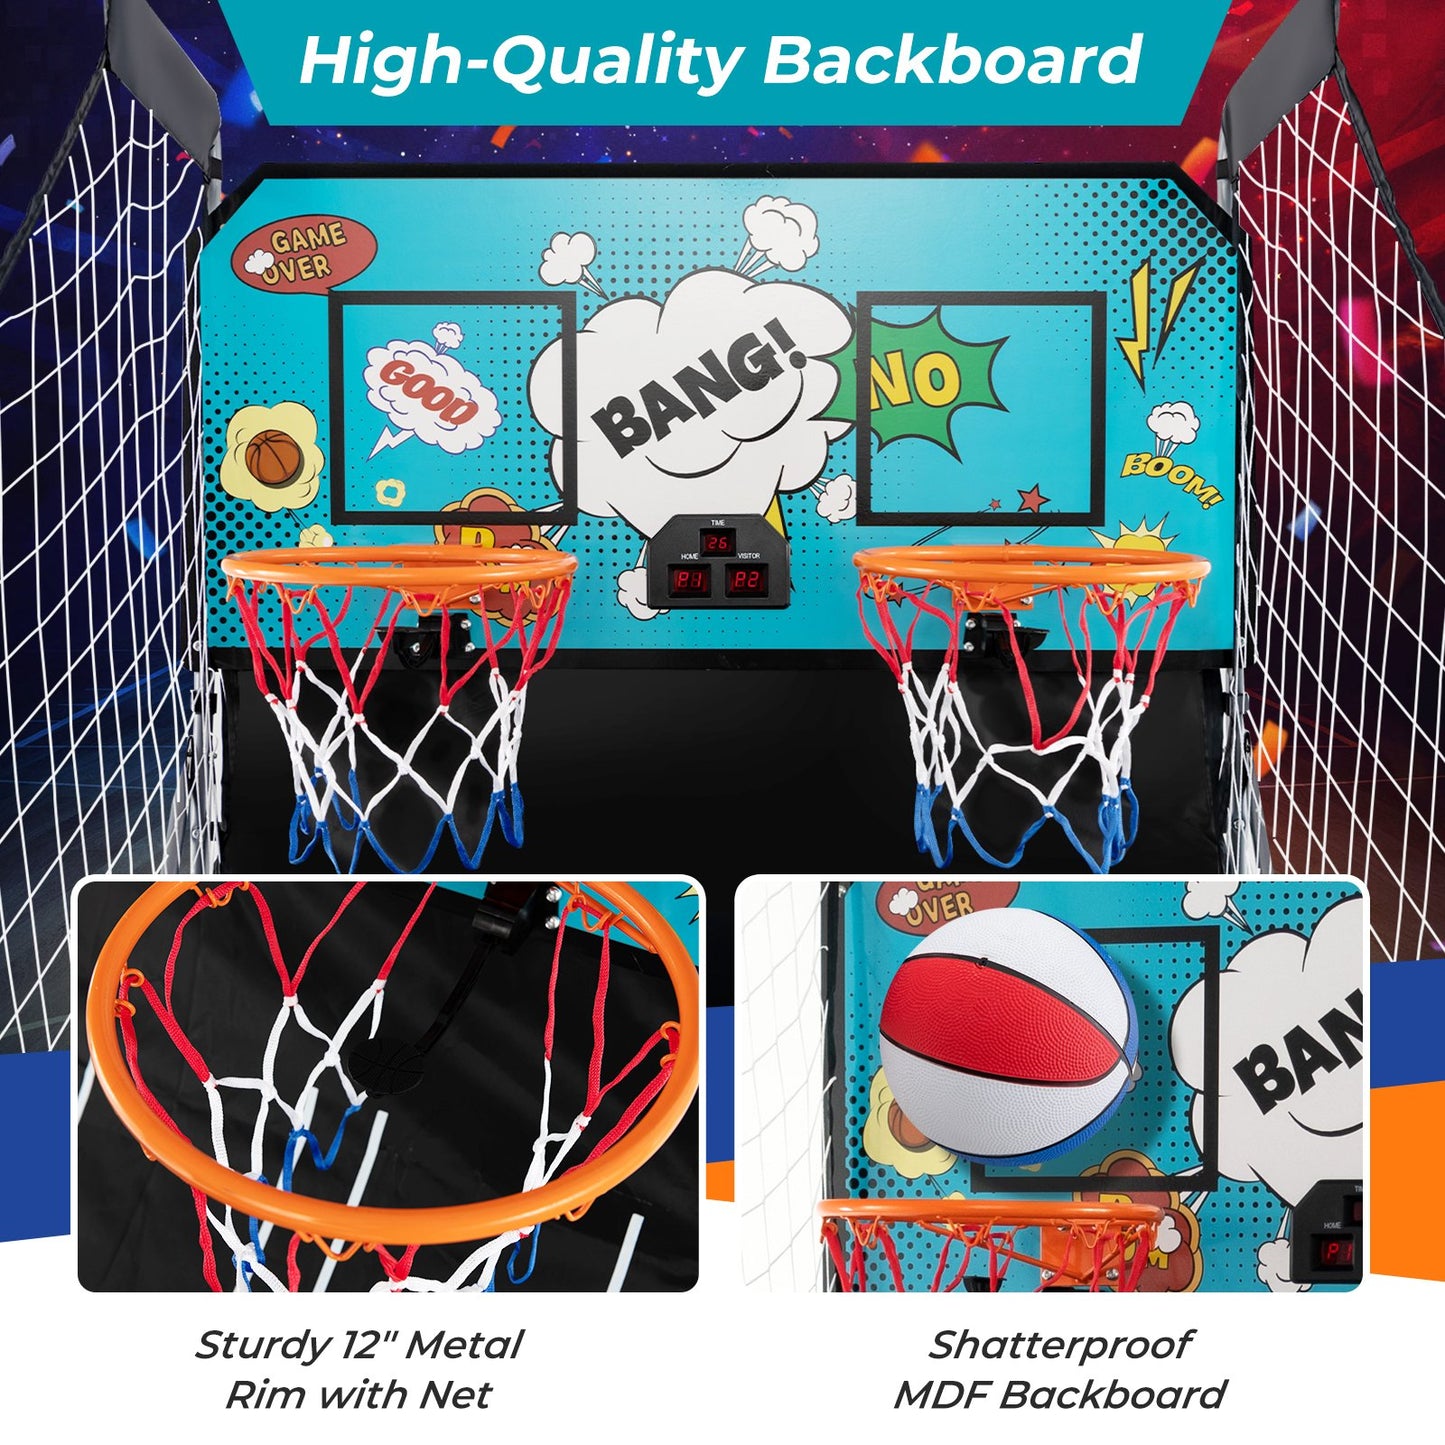 Dual Shot Basketball Arcade Game with 8 Game Modes and 4 Balls, Green